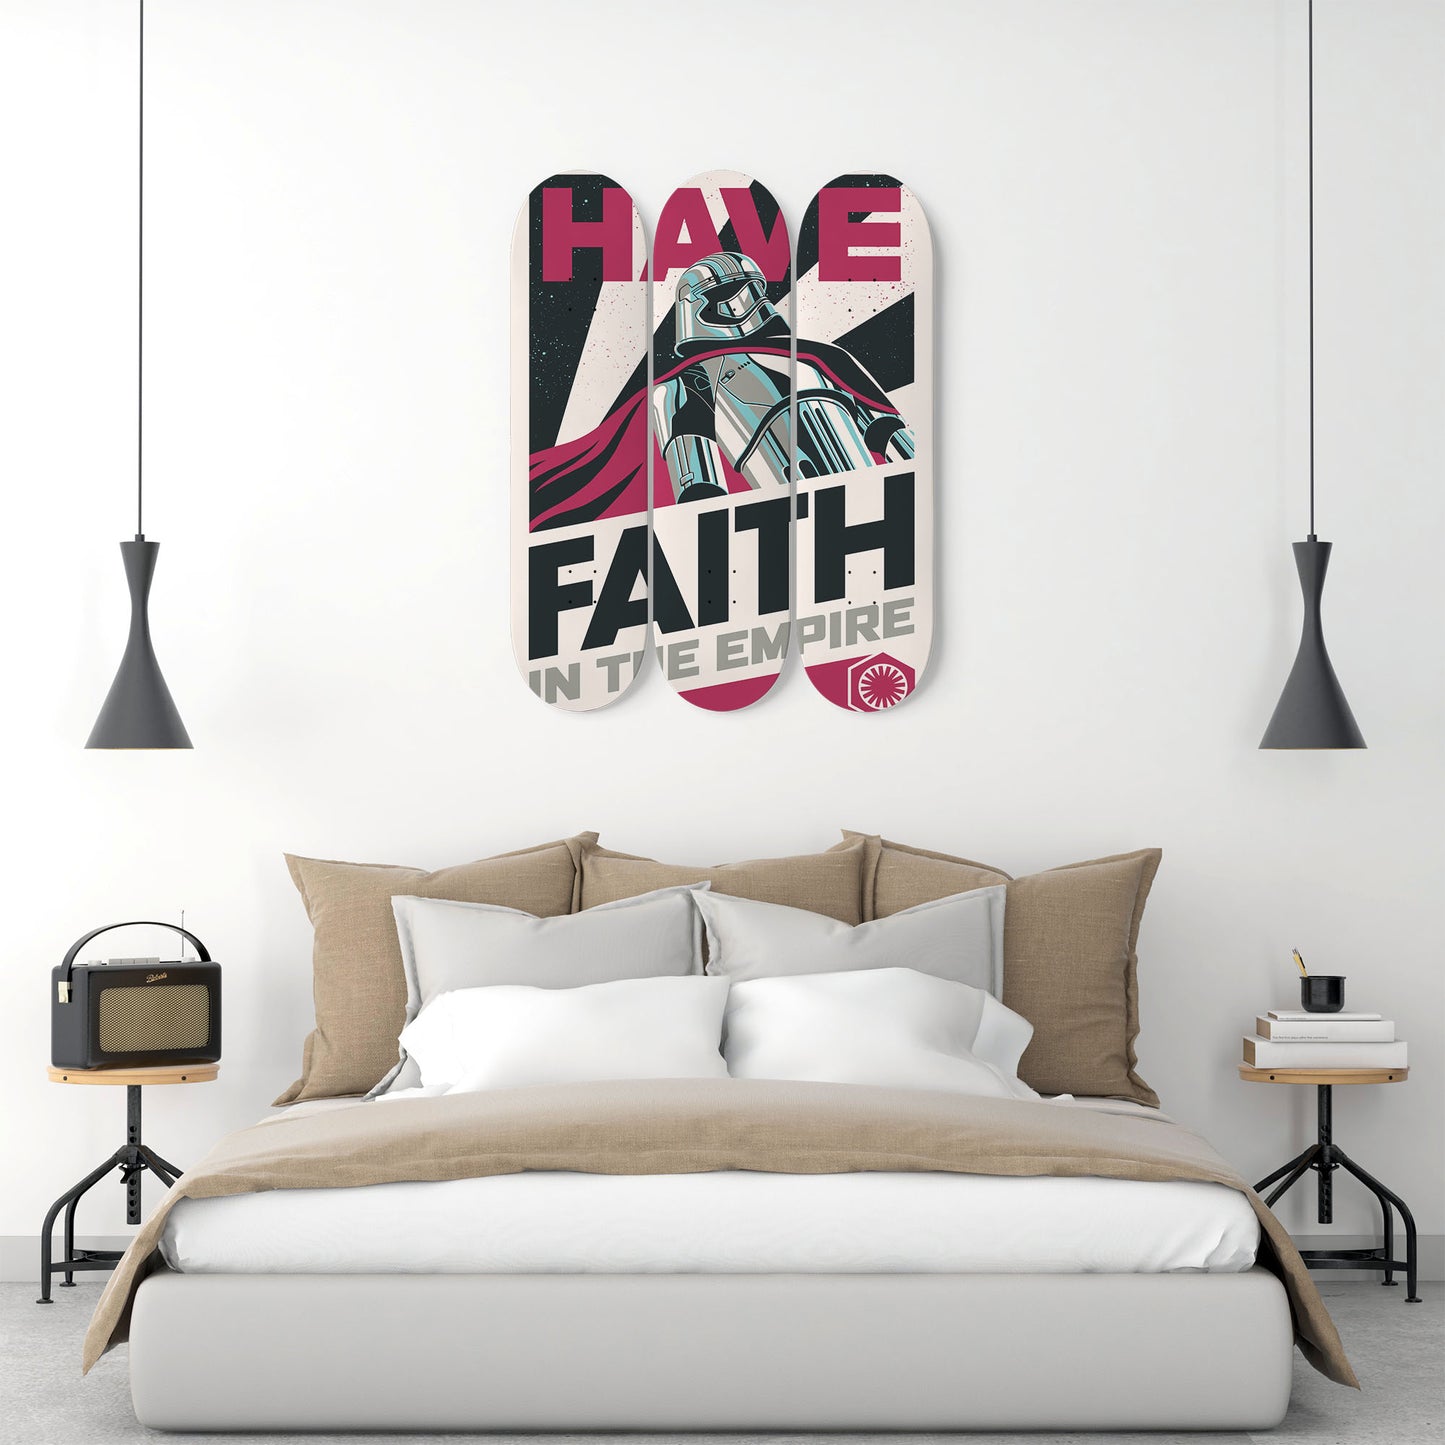 Star Wars - Stormtrooper - Have Faith in the Empire - 3-piece Skateboard Wall Art